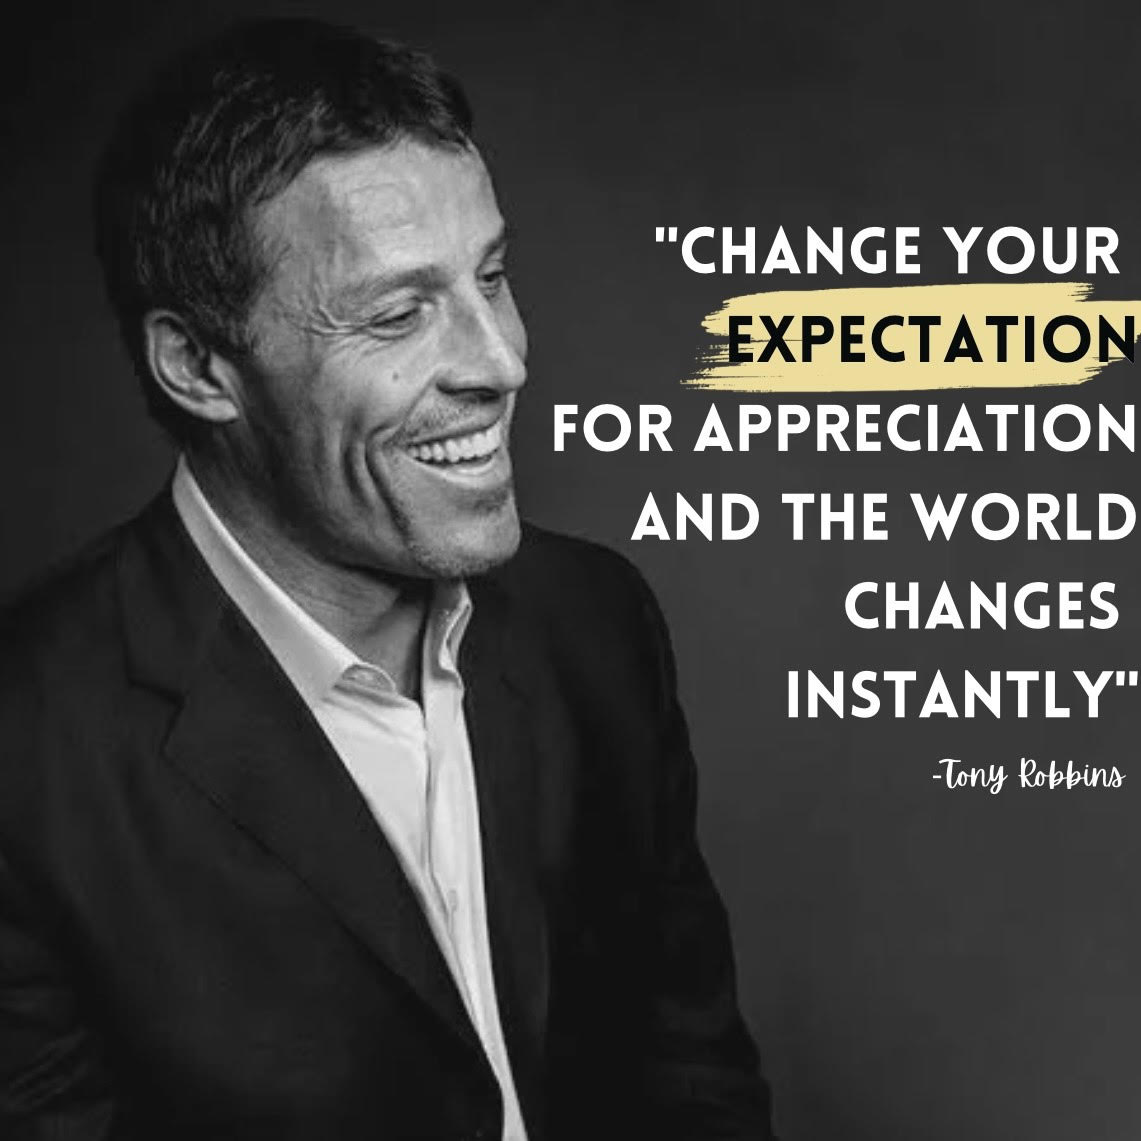 How has your view of appreciation changed your world?